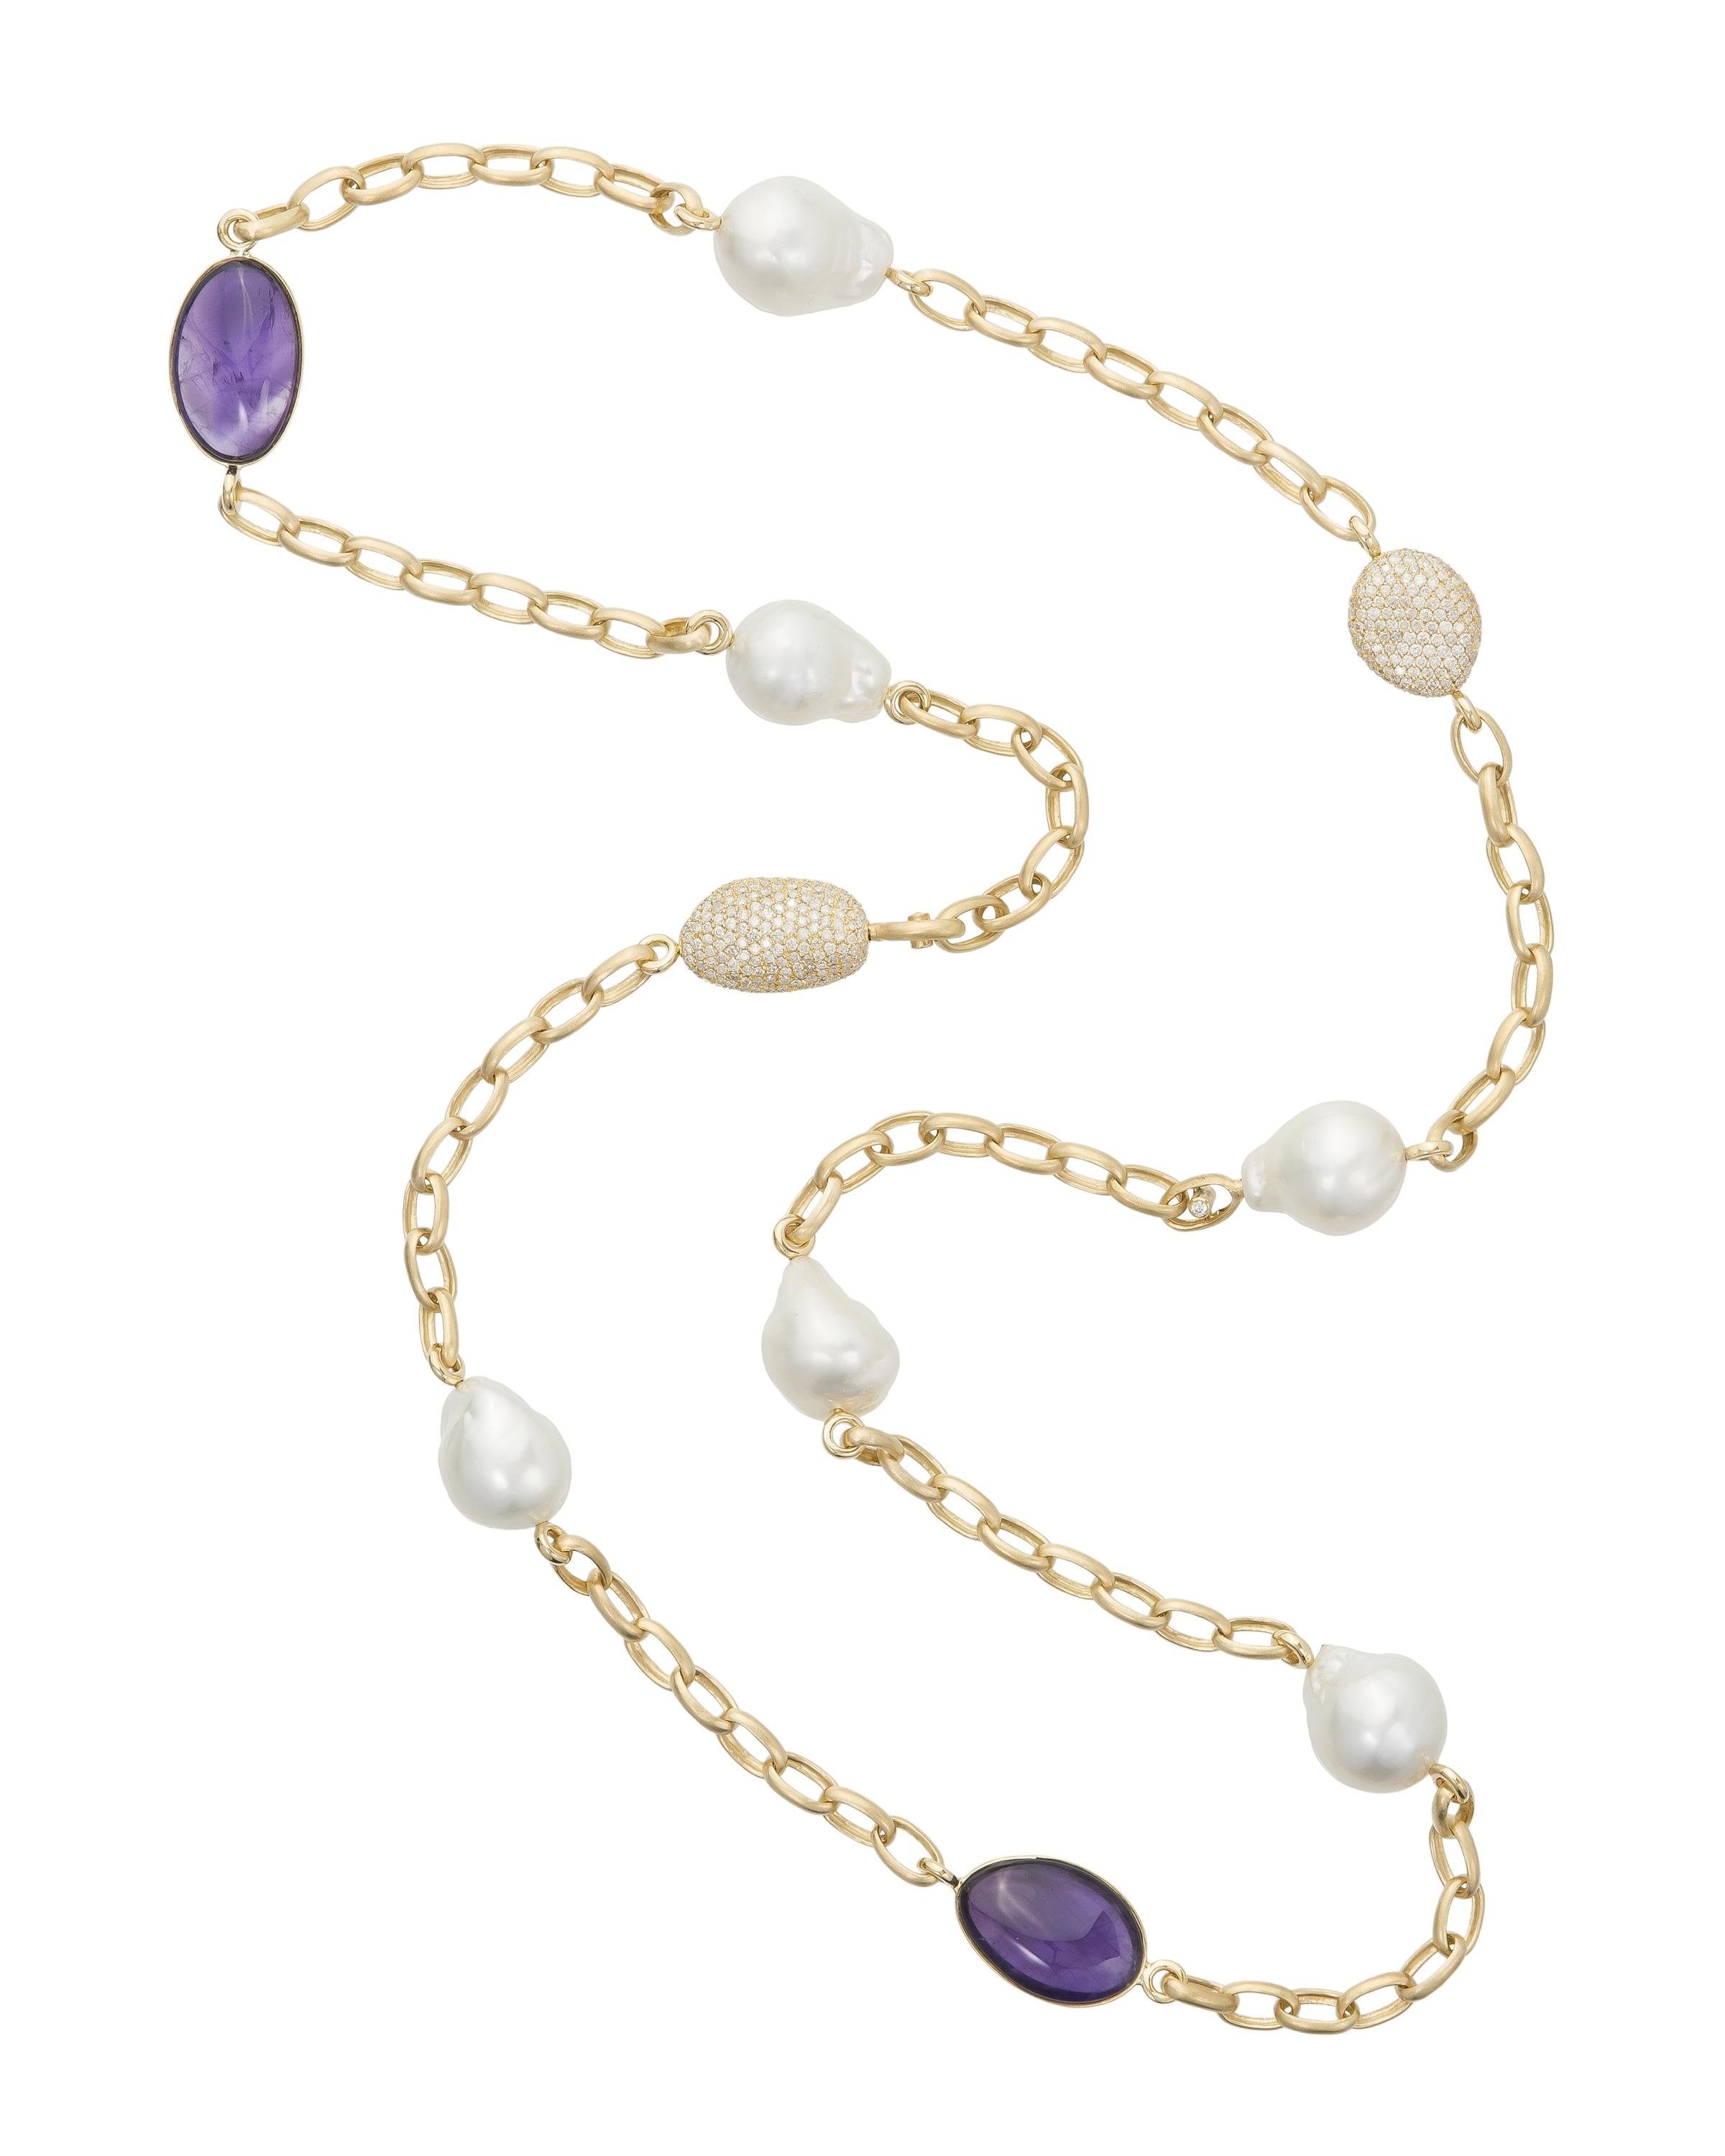 South Sea pearl and amethyst necklace, crafted in 18 karat yellow gold chain.